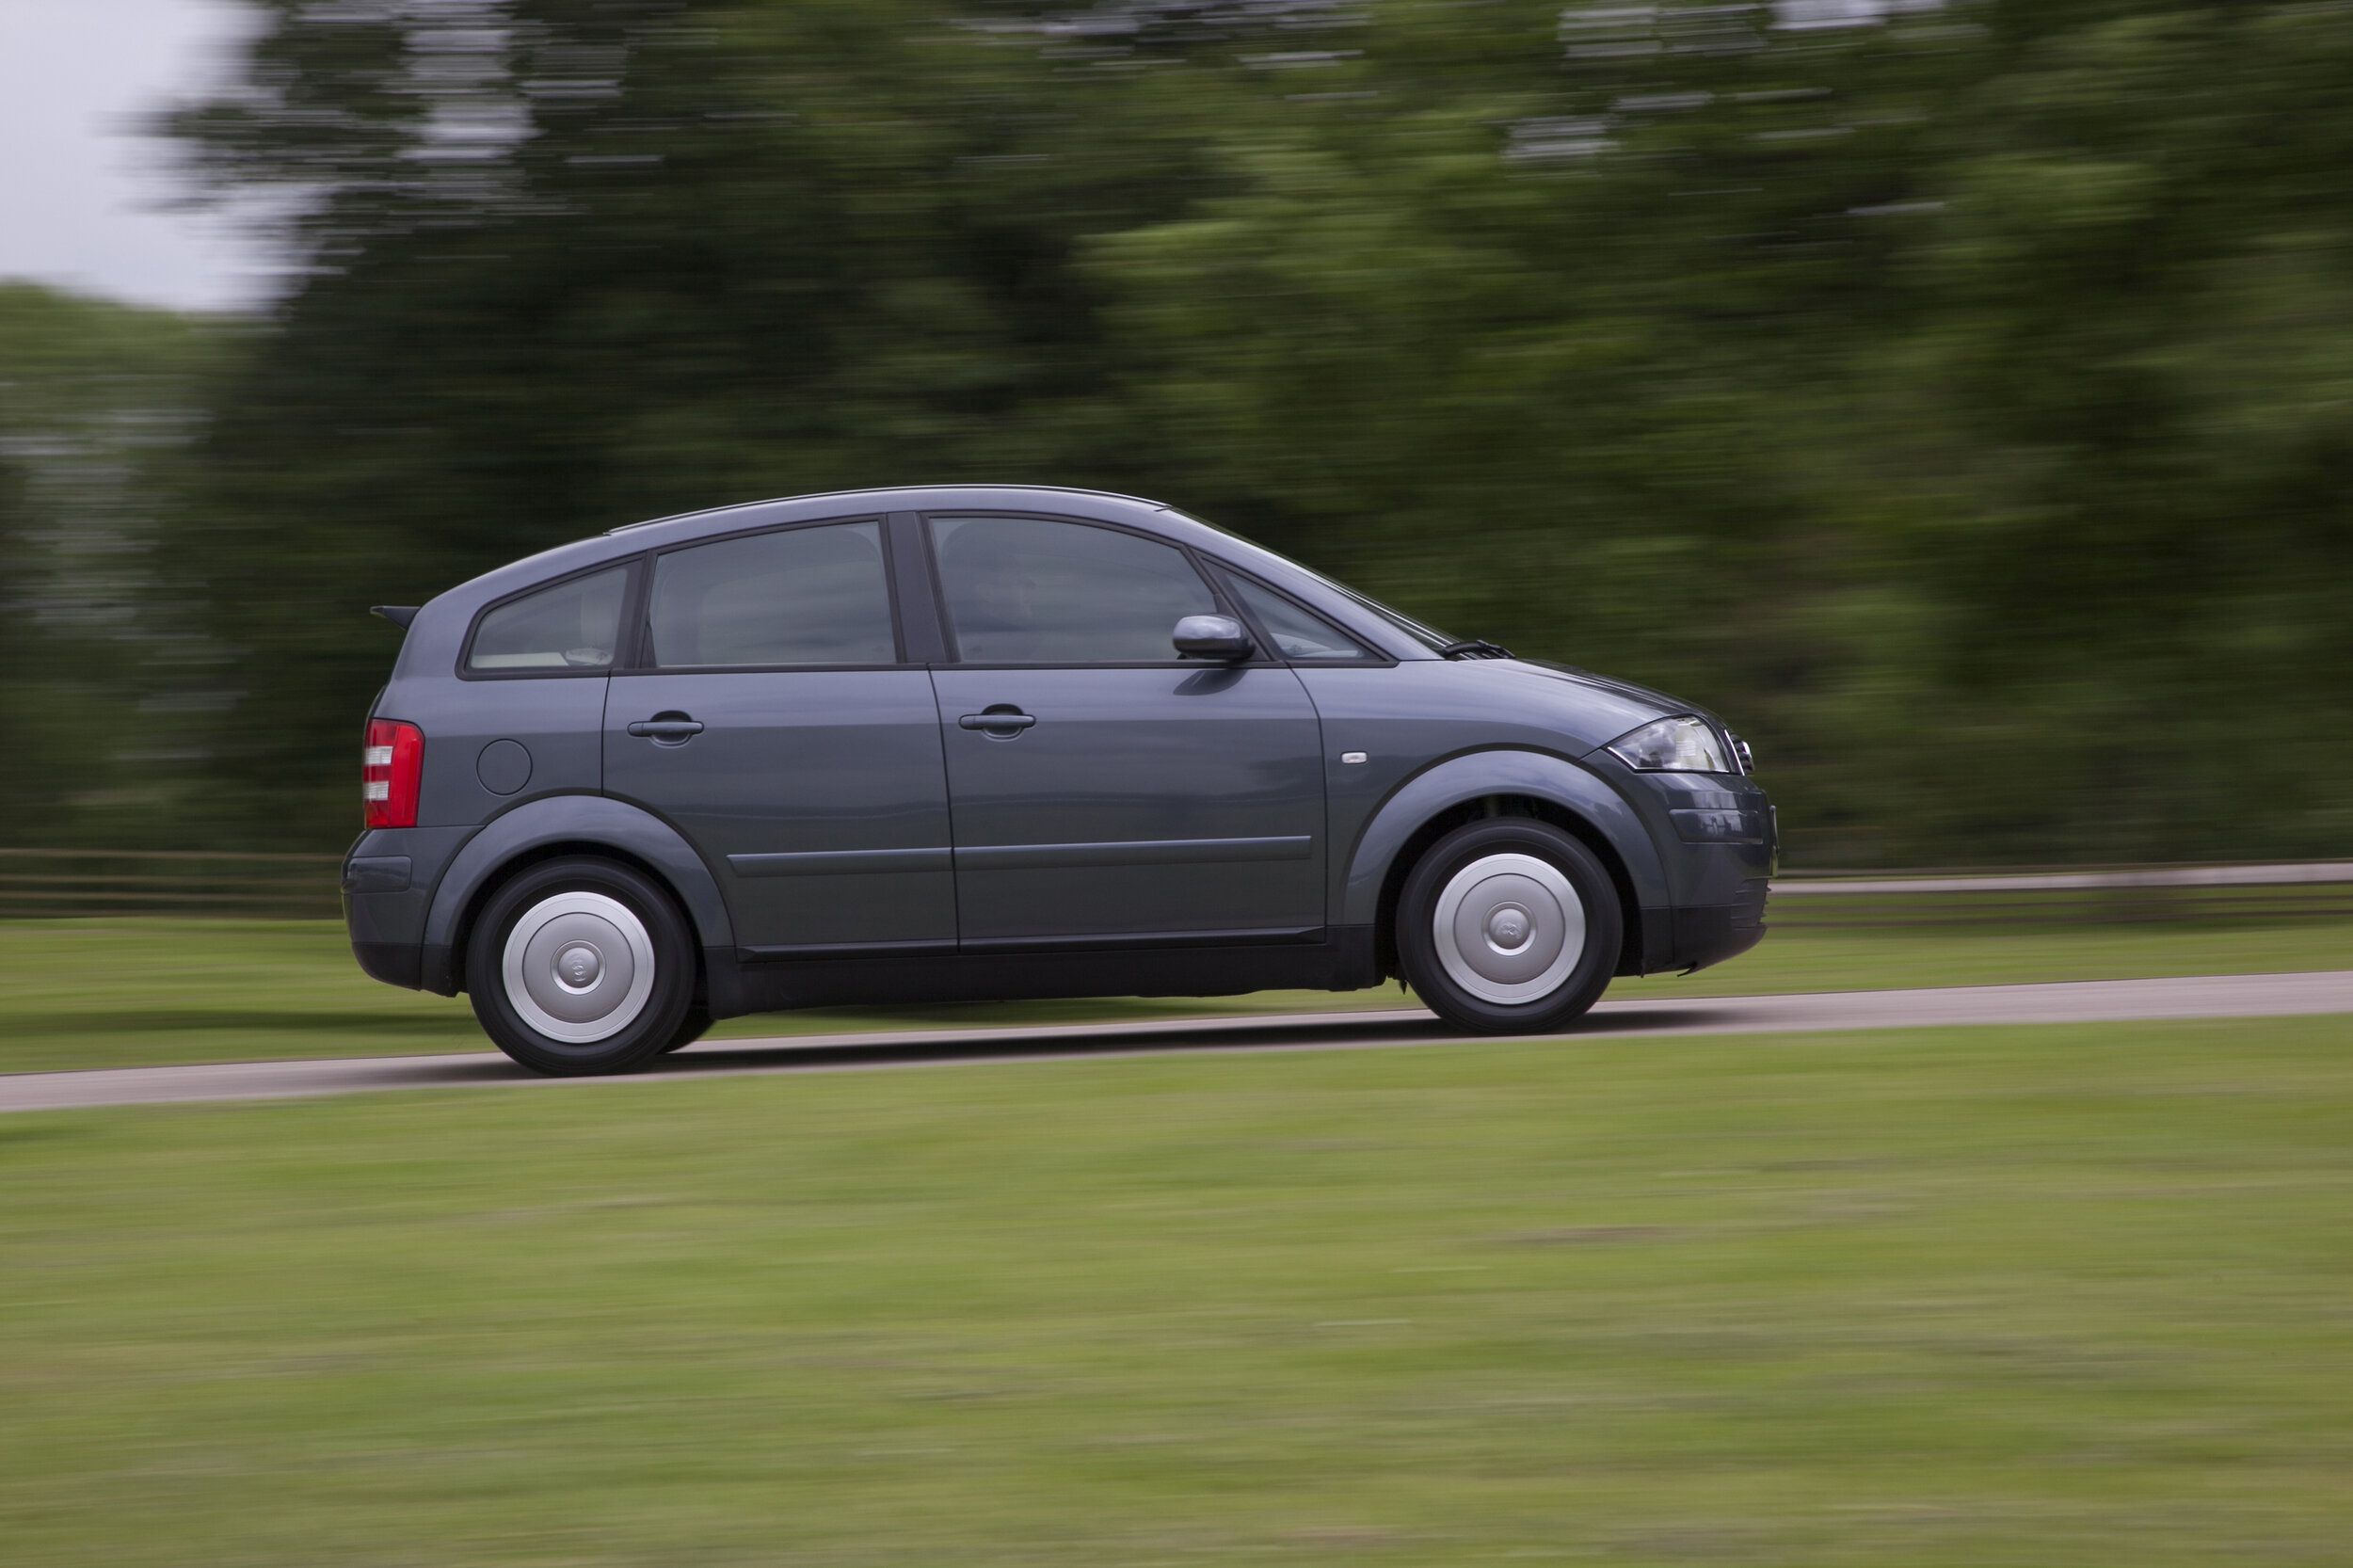 Audi A2 3L: slow, steady, up to 100mpg